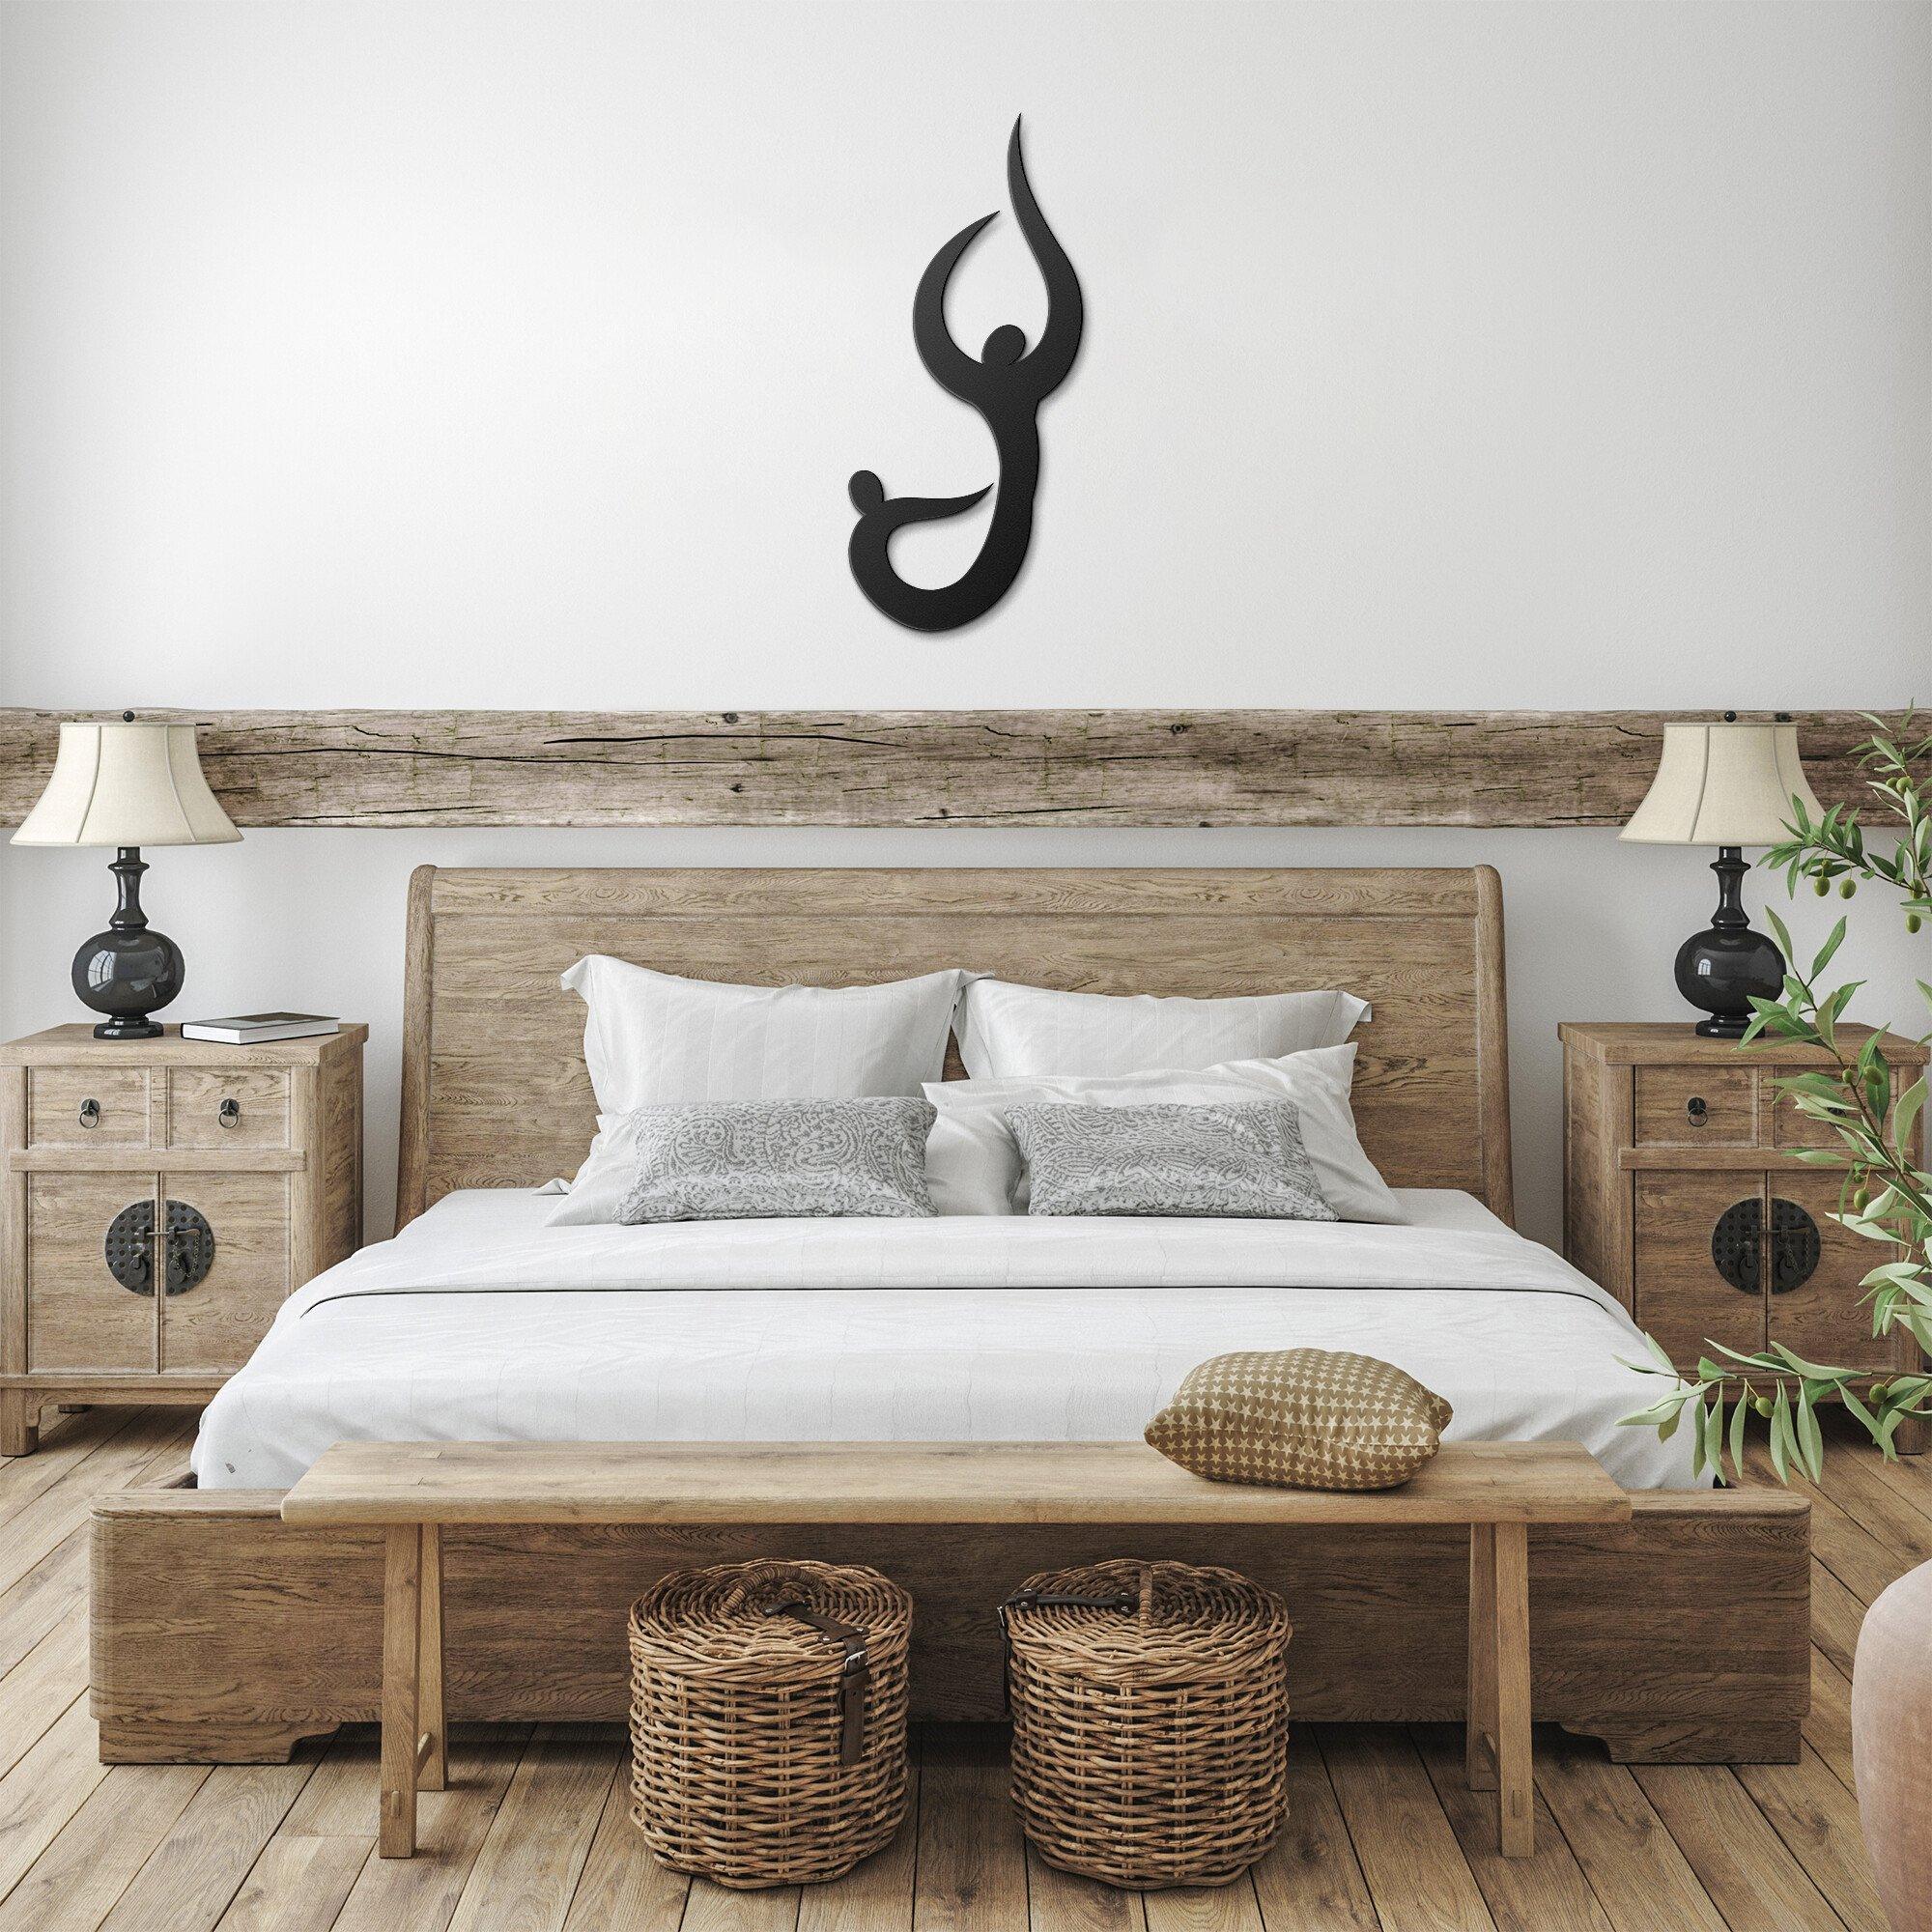 Zen Room Ideas Couple Yoga Metal Decor - Personal Hour for Yoga and Meditations 